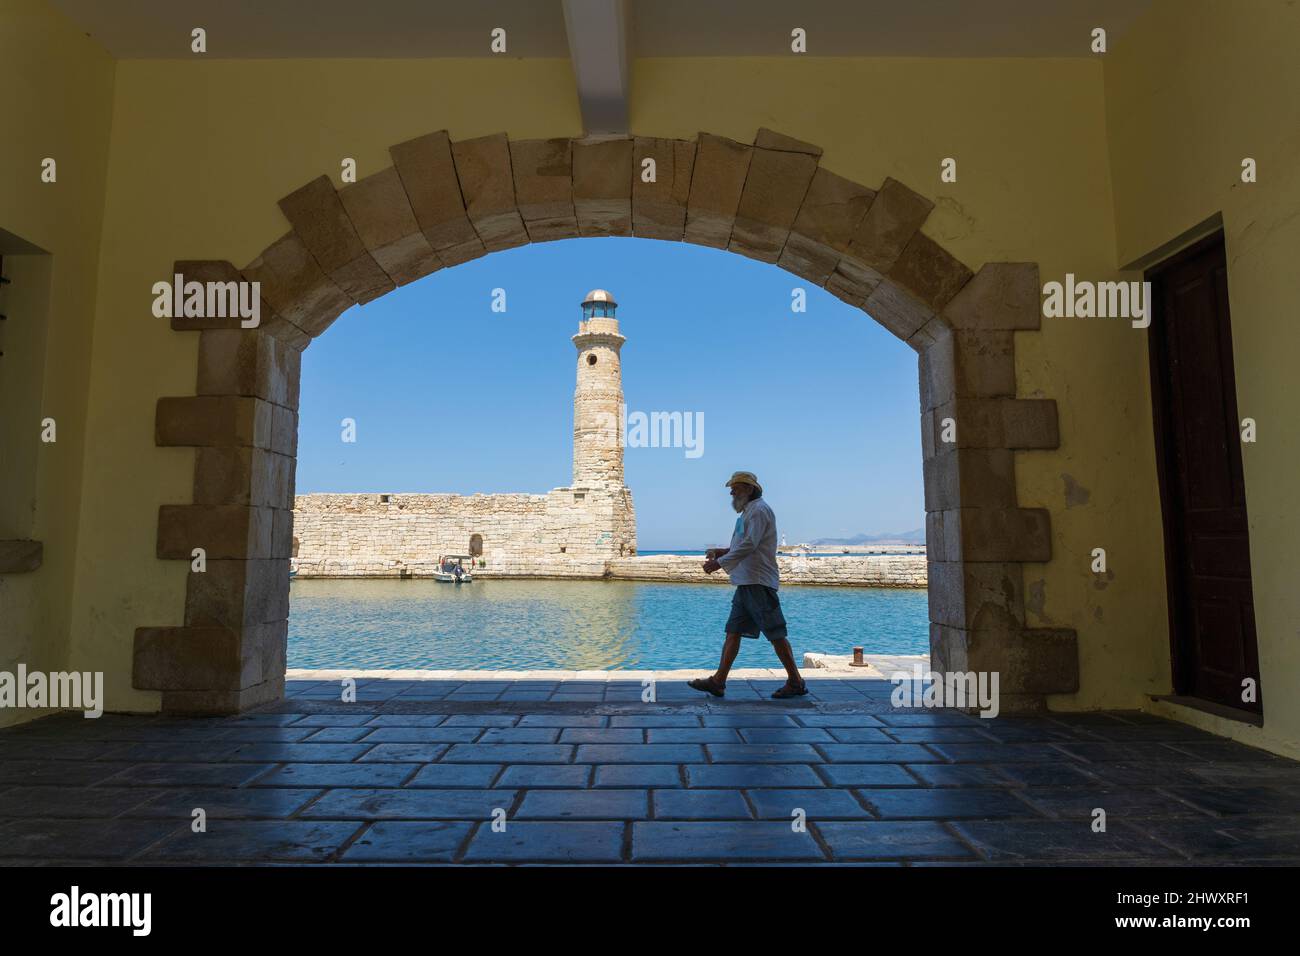 Rethymno, Crete, Greece - June the 30th, 2021: Person walking along the cost of Rethymno, the light house in the background Stock Photo